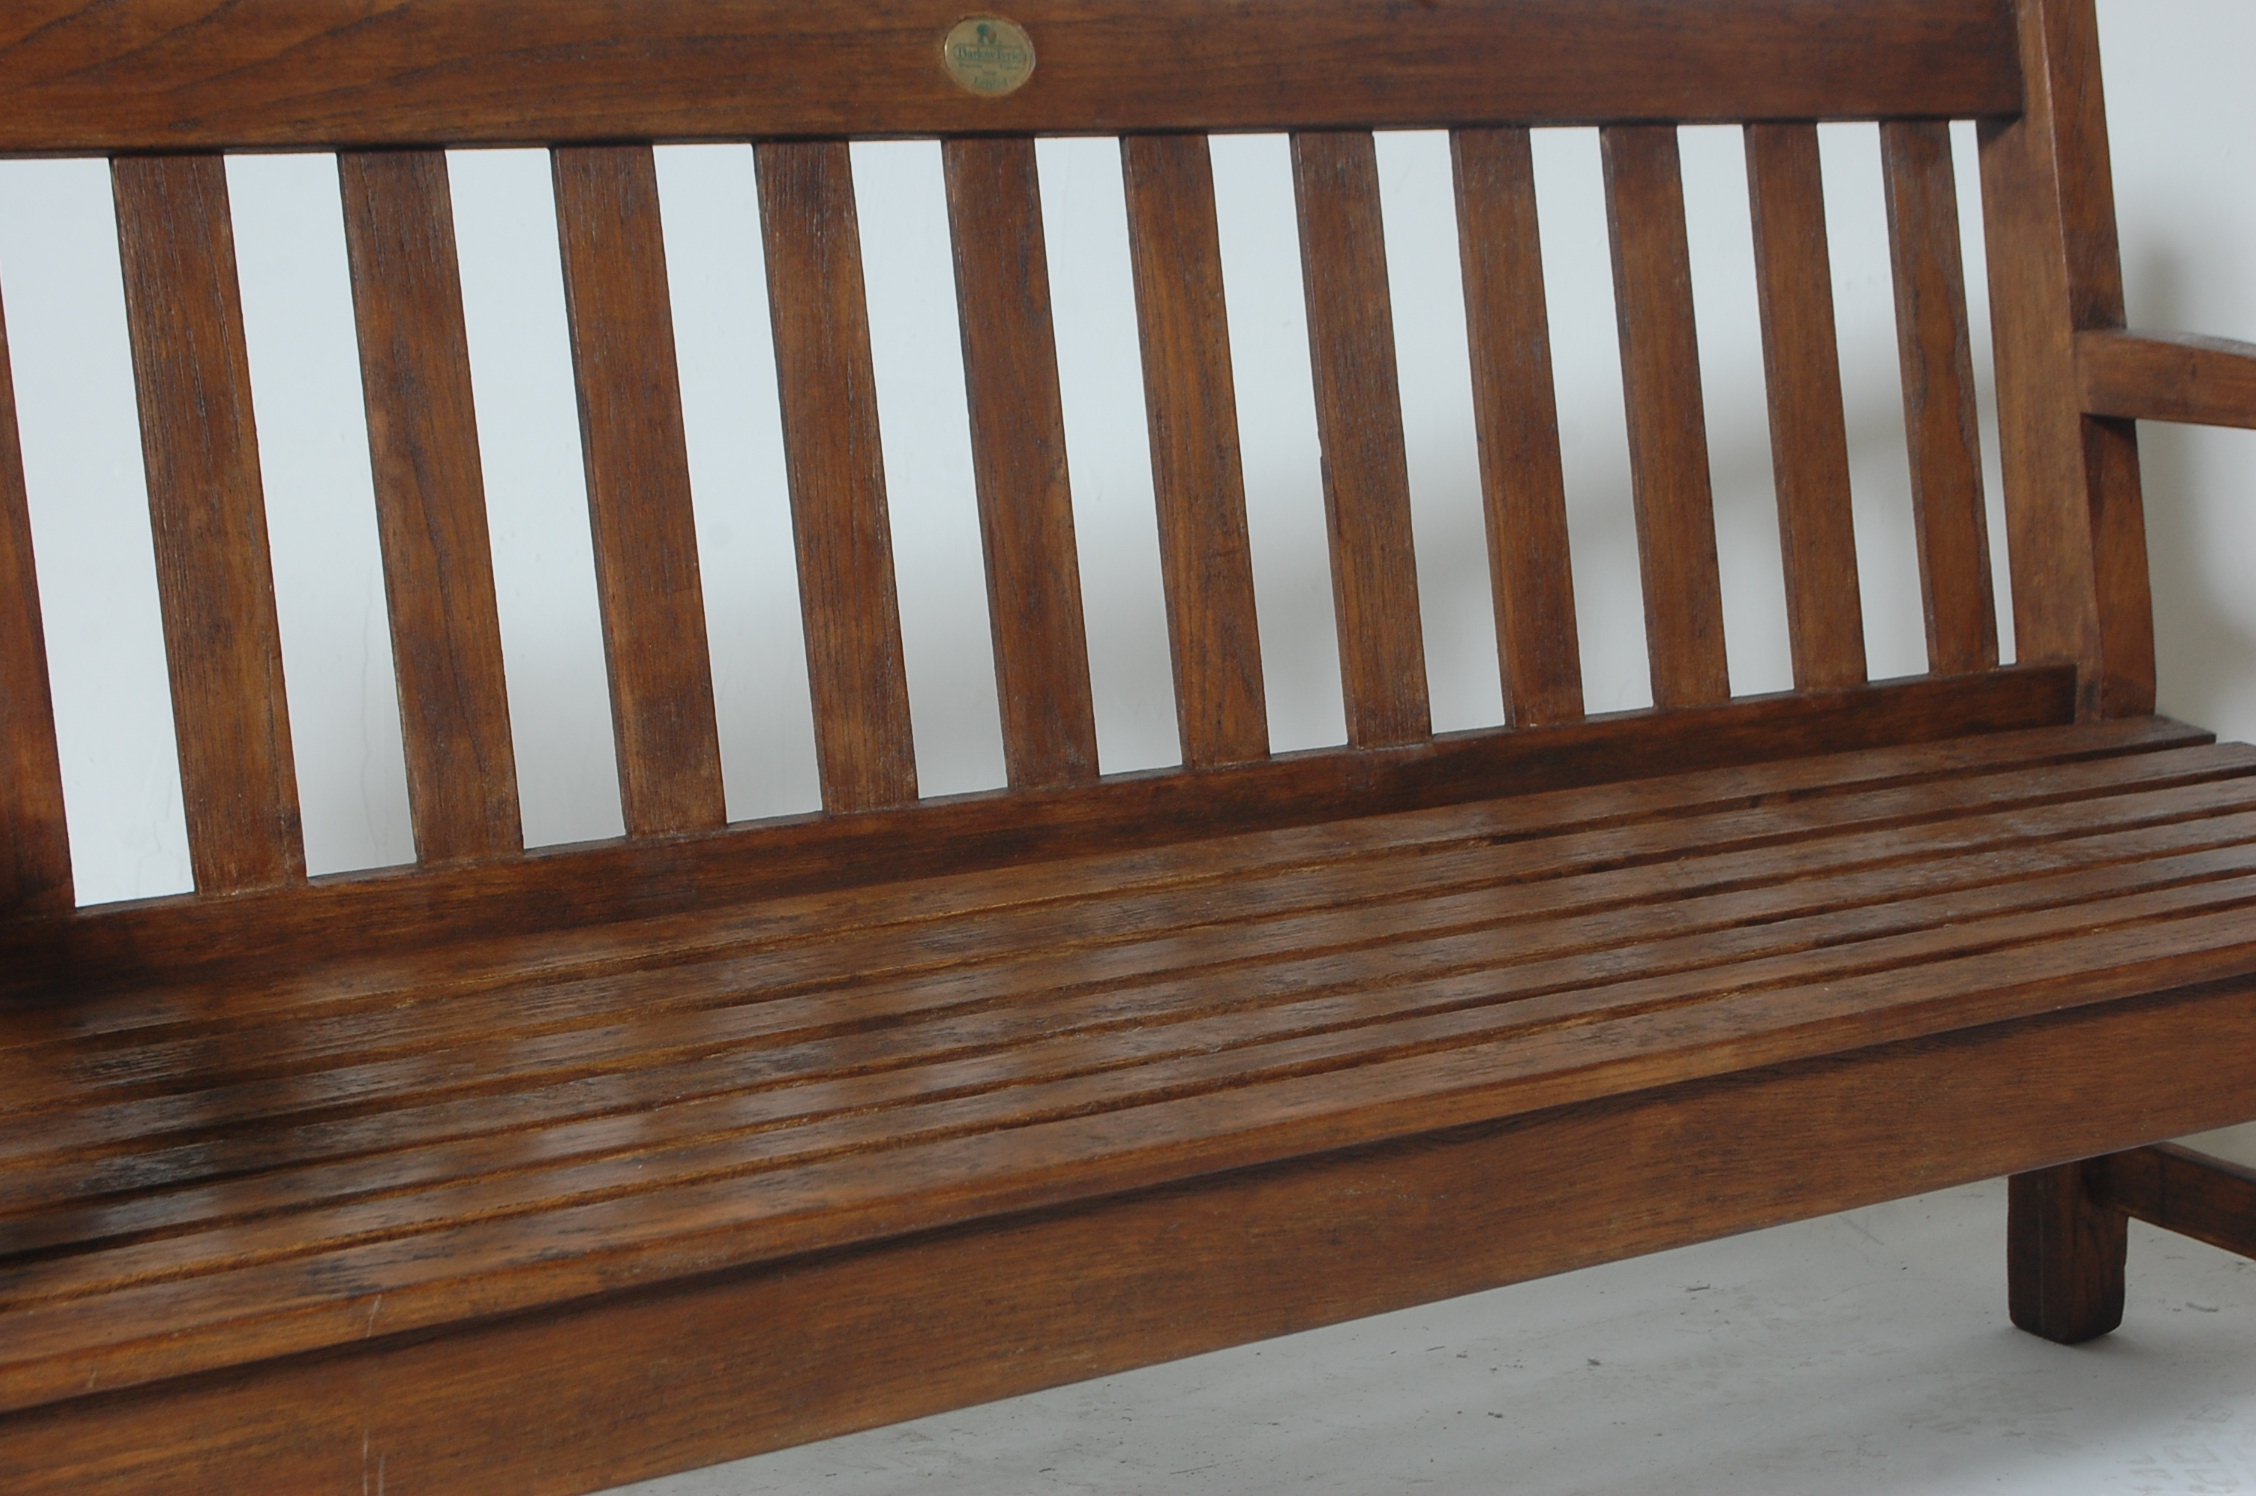 QUALITY CONTEMPORARY SOLID TEAK GARDEN BENCH - Image 3 of 6